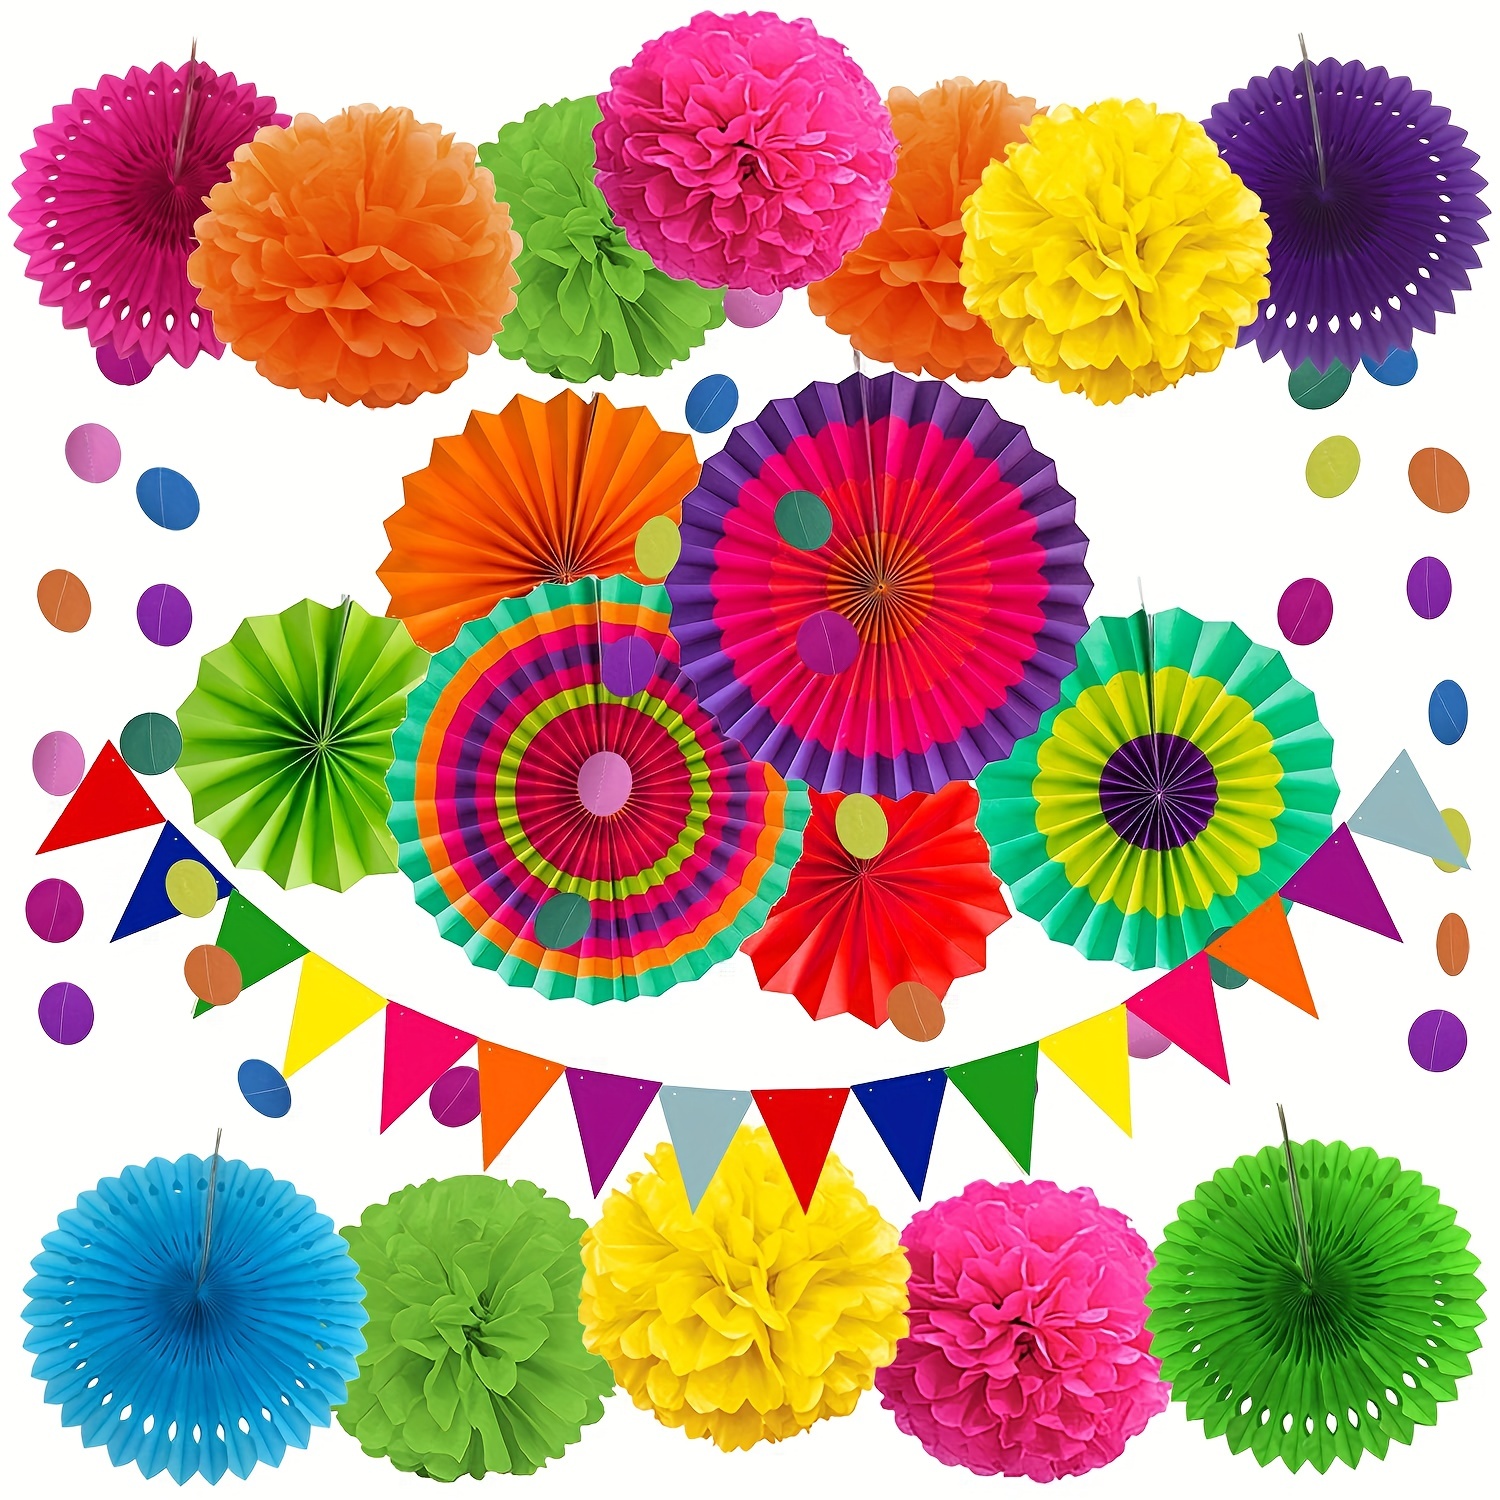 

20-piece Colorful Fiesta Paper Fan & Tissue Paper Pom Pom Set - Perfect For Birthday, Wedding, Fiesta, Or Mexican Party Decorations! Easter Gift